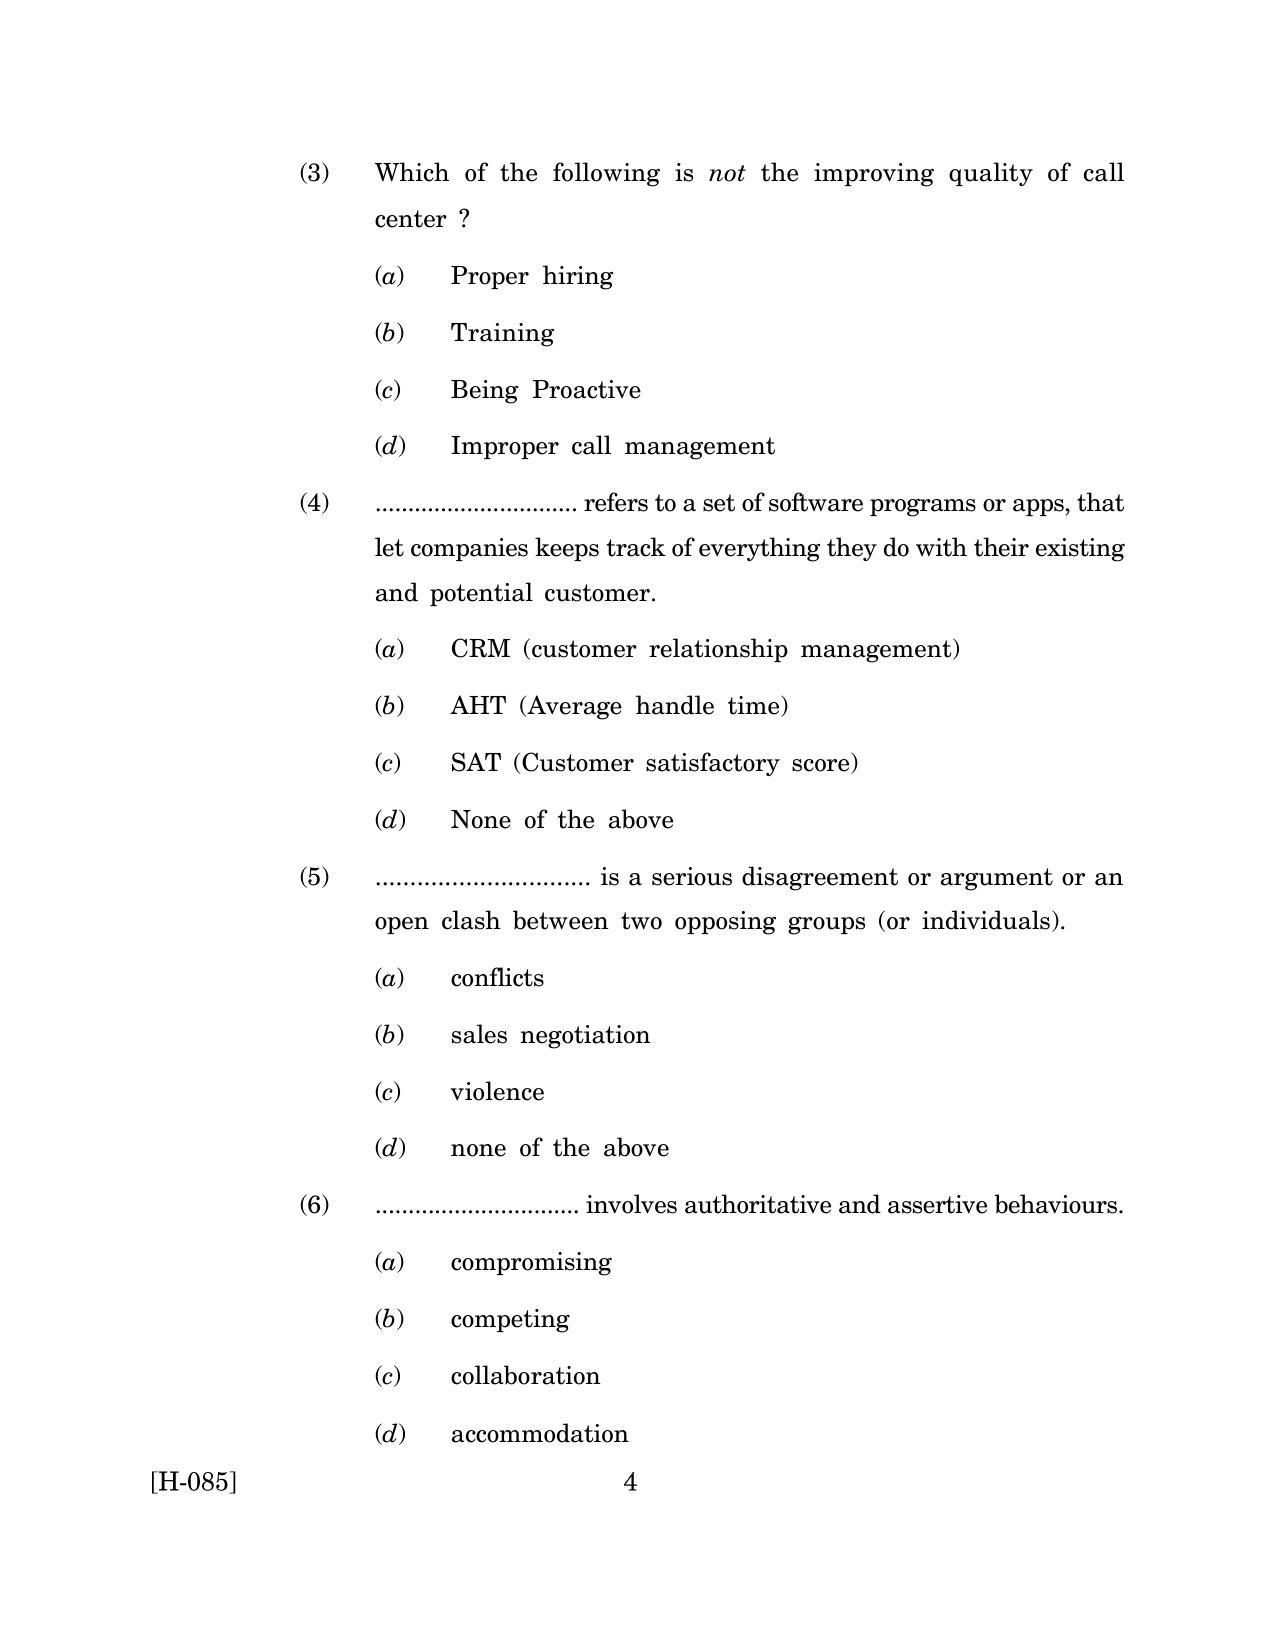 Goa Board Class 12 Telecommunication   (March 2019_0) Question Paper - Page 4